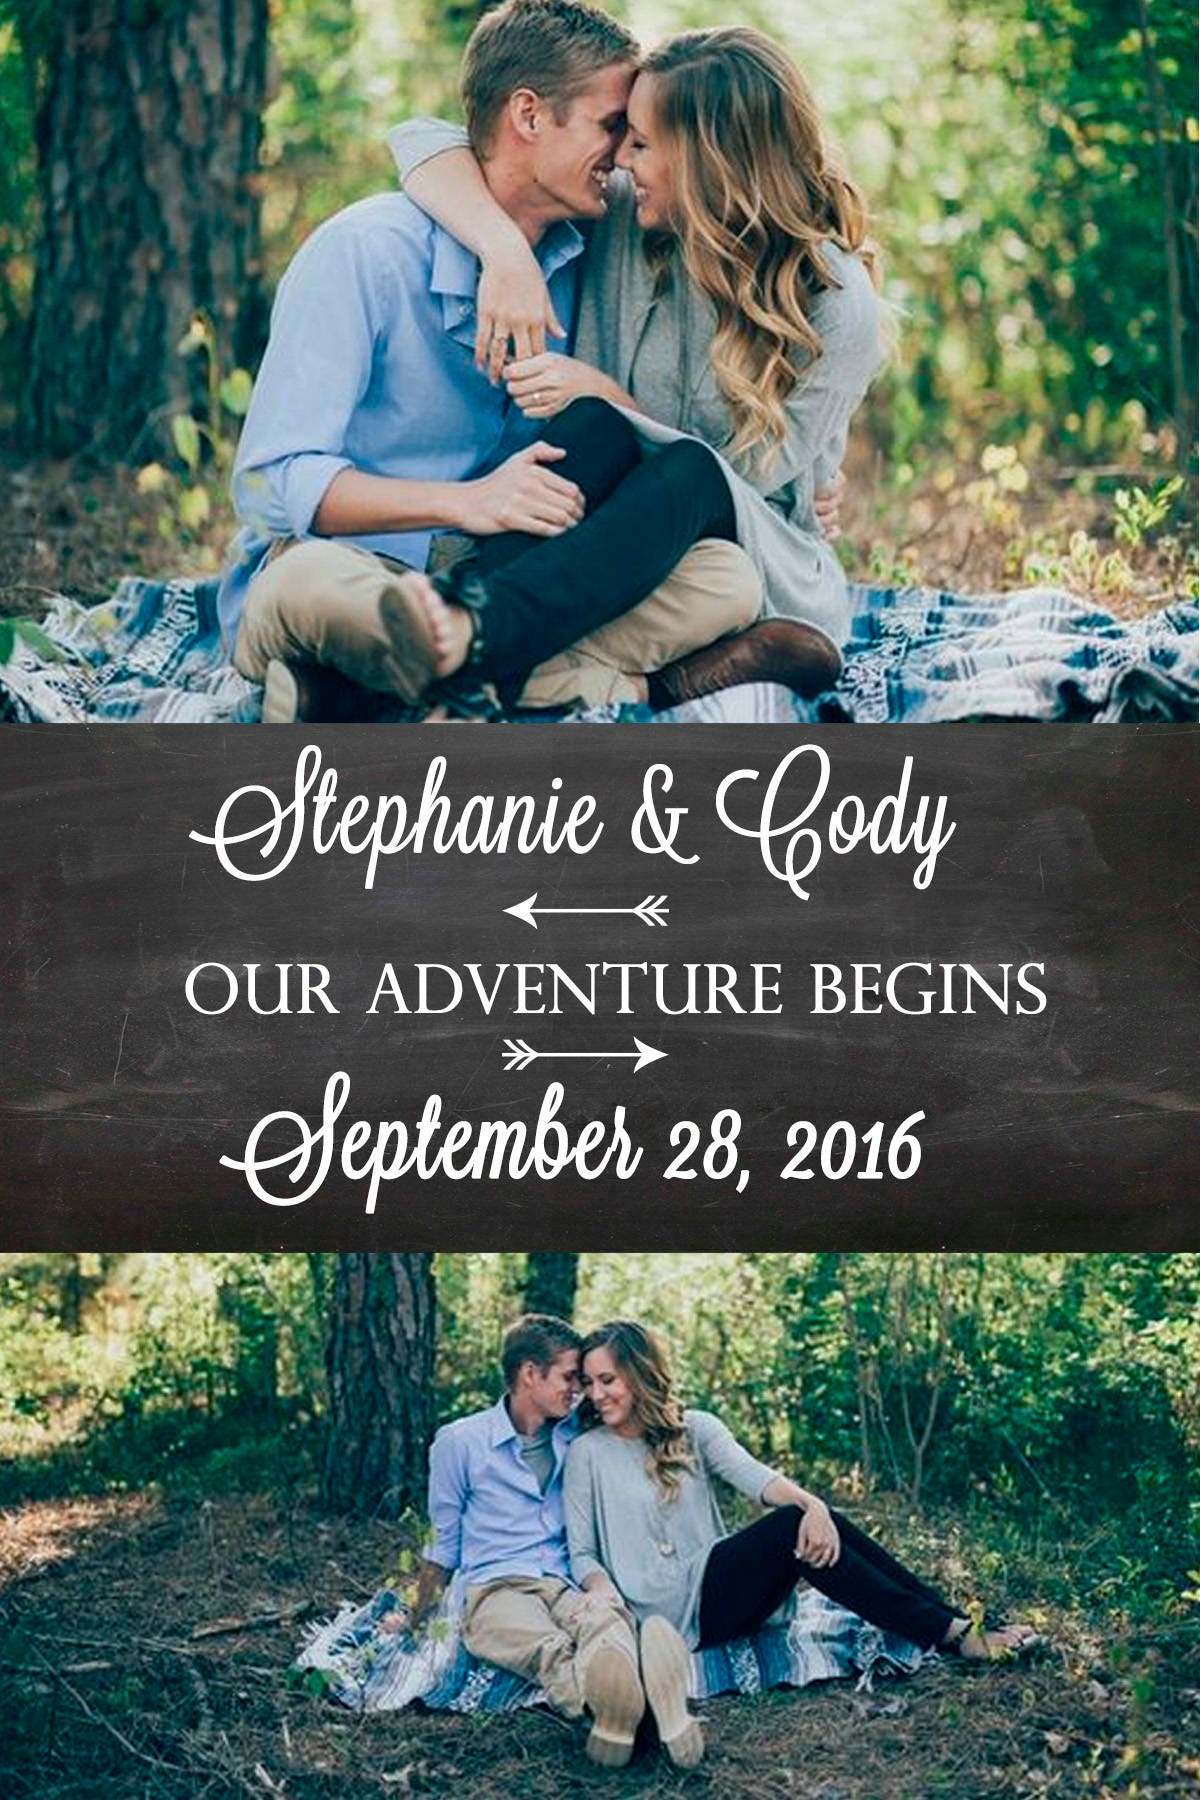 Photo Save the date Magnet, Wedding Save the Date, Photo save the date, beach save the date magnet, Save the date picture, Set of 50 magnets